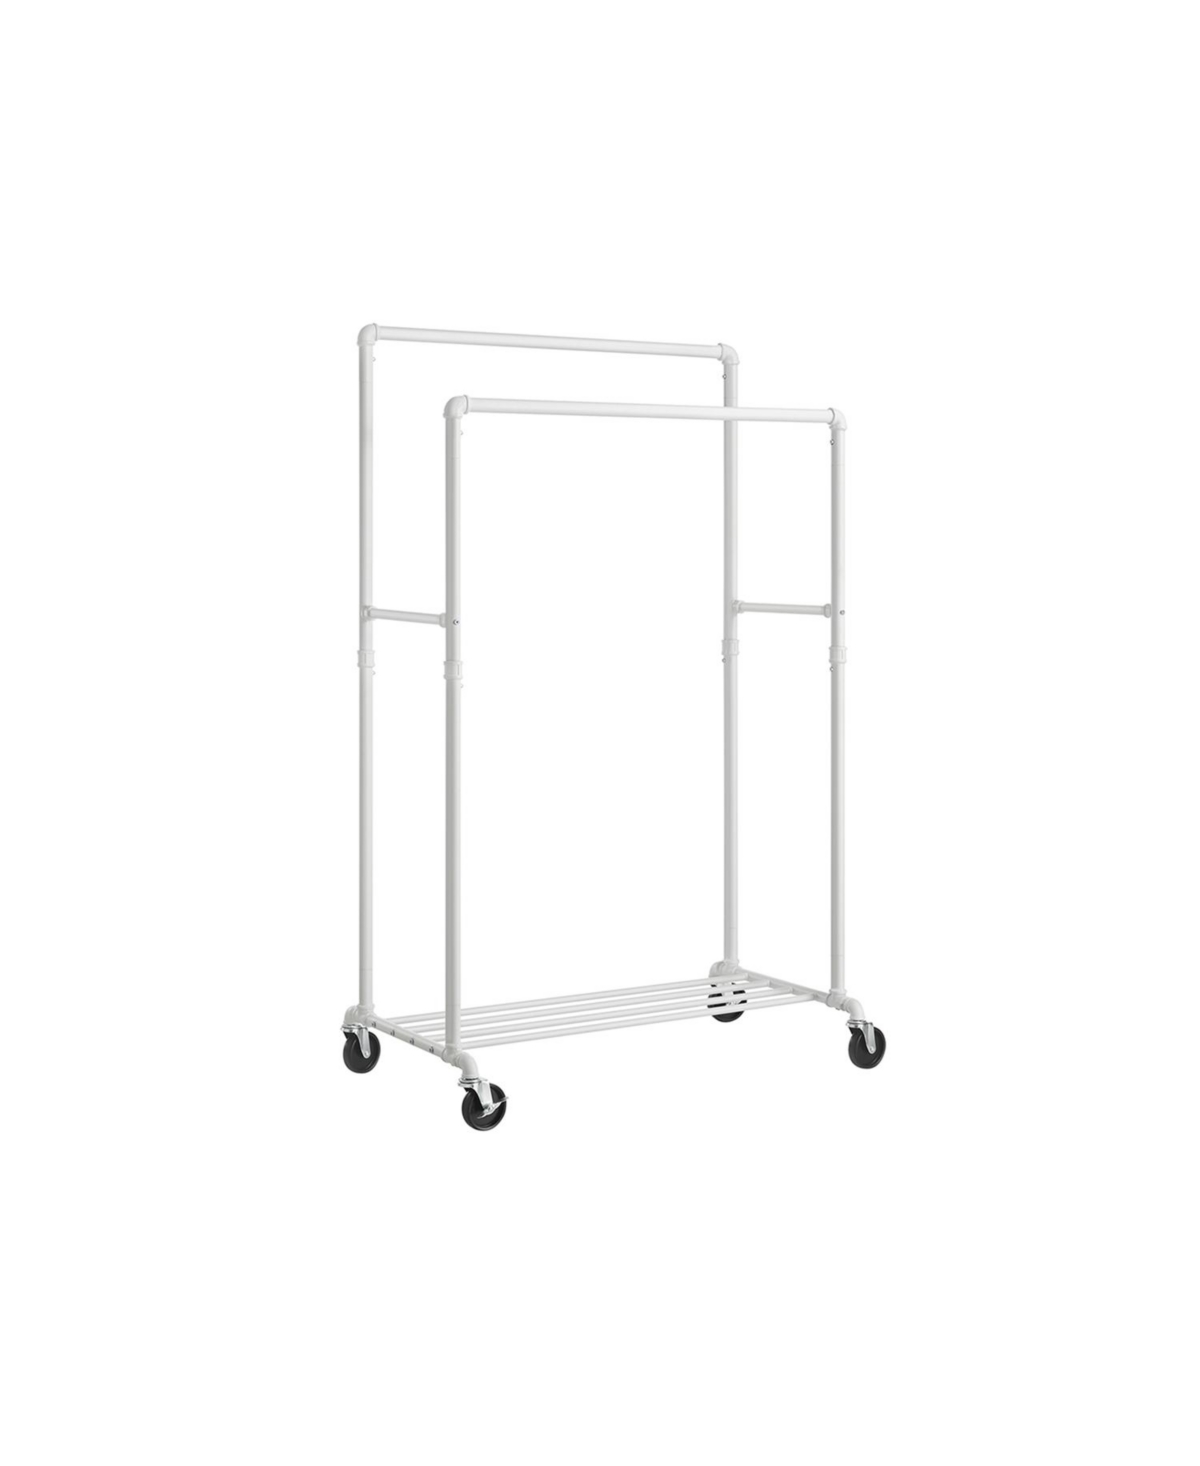 Industrial Style Clothes Garment Rack on Wheels, Double Hanging Rod Metal Clothing Rack - White